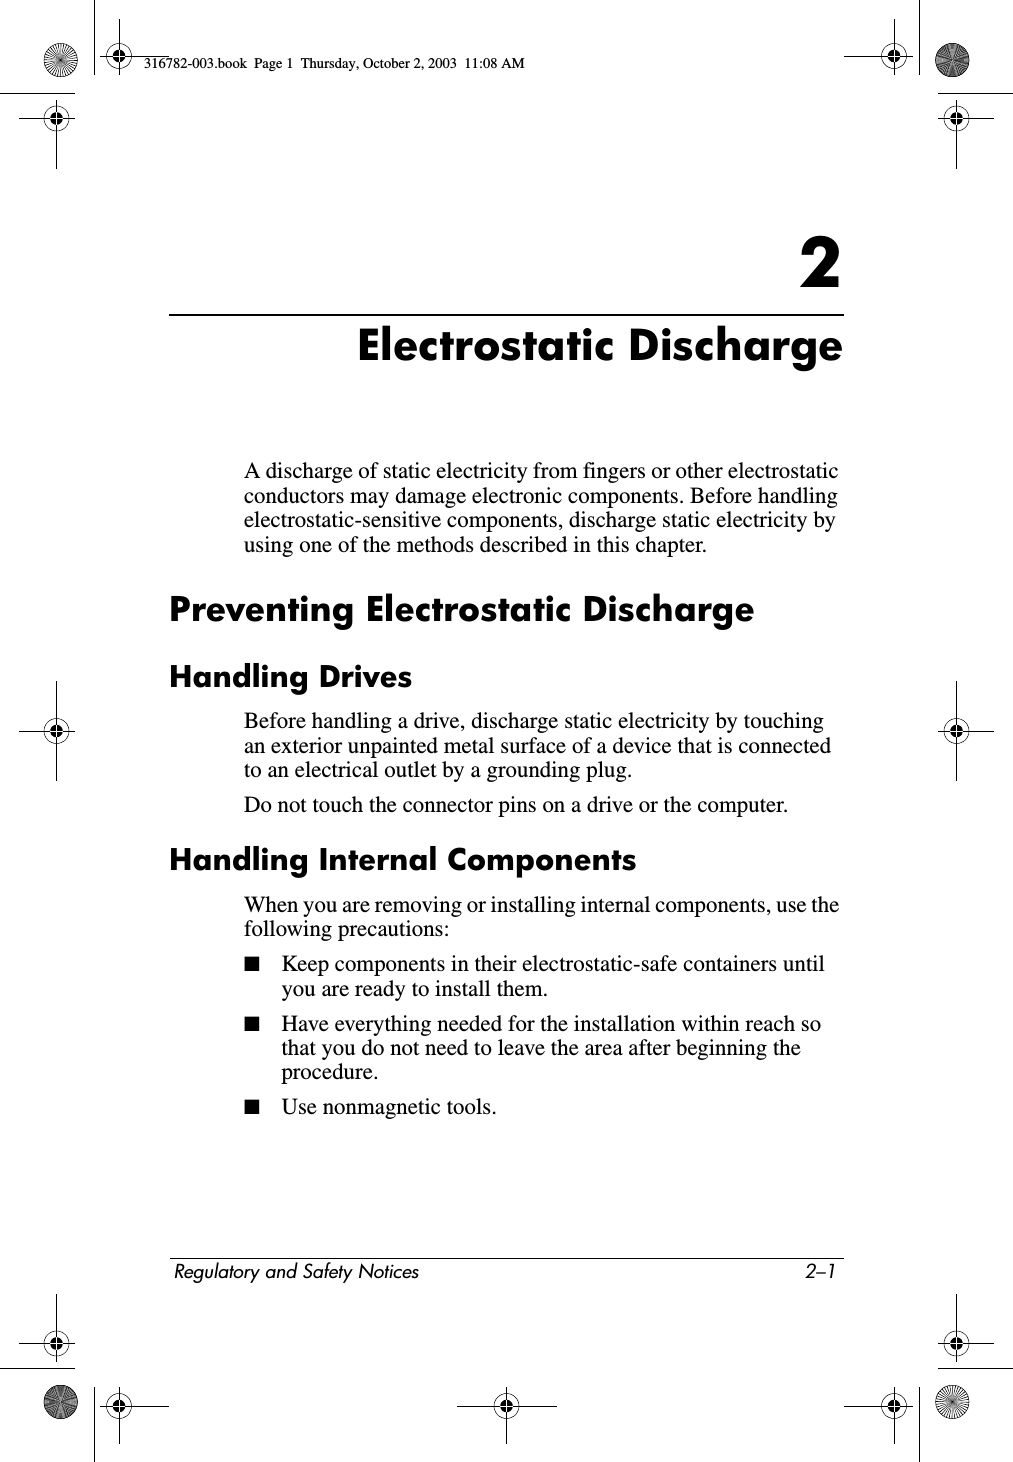 Regulatory and Safety Notices 2–12Electrostatic DischargeA discharge of static electricity from fingers or other electrostatic conductors may damage electronic components. Before handling electrostatic-sensitive components, discharge static electricity by using one of the methods described in this chapter.Preventing Electrostatic DischargeHandling DrivesBefore handling a drive, discharge static electricity by touching an exterior unpainted metal surface of a device that is connected to an electrical outlet by a grounding plug.Do not touch the connector pins on a drive or the computer.Handling Internal ComponentsWhen you are removing or installing internal components, use the following precautions:■Keep components in their electrostatic-safe containers until you are ready to install them.■Have everything needed for the installation within reach so that you do not need to leave the area after beginning the procedure.■Use nonmagnetic tools.316782-003.book  Page 1  Thursday, October 2, 2003  11:08 AM